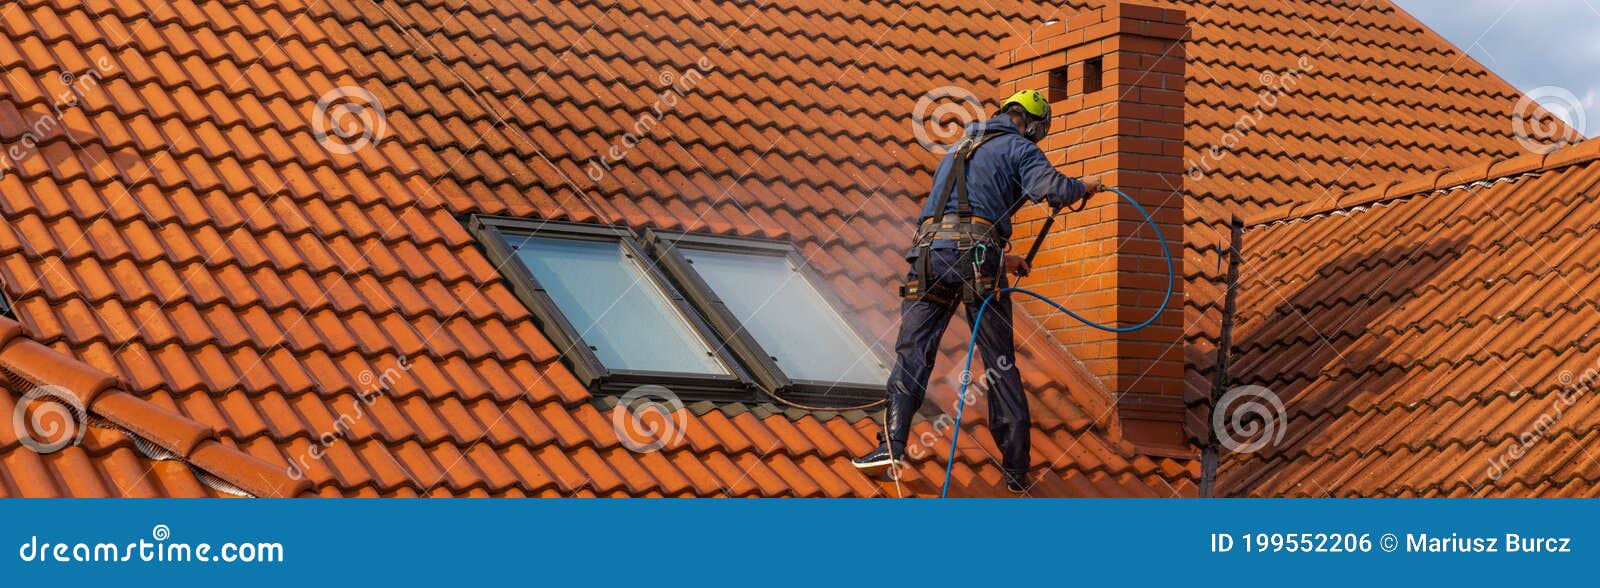 high-altitude worker washing the roof with pressurized water